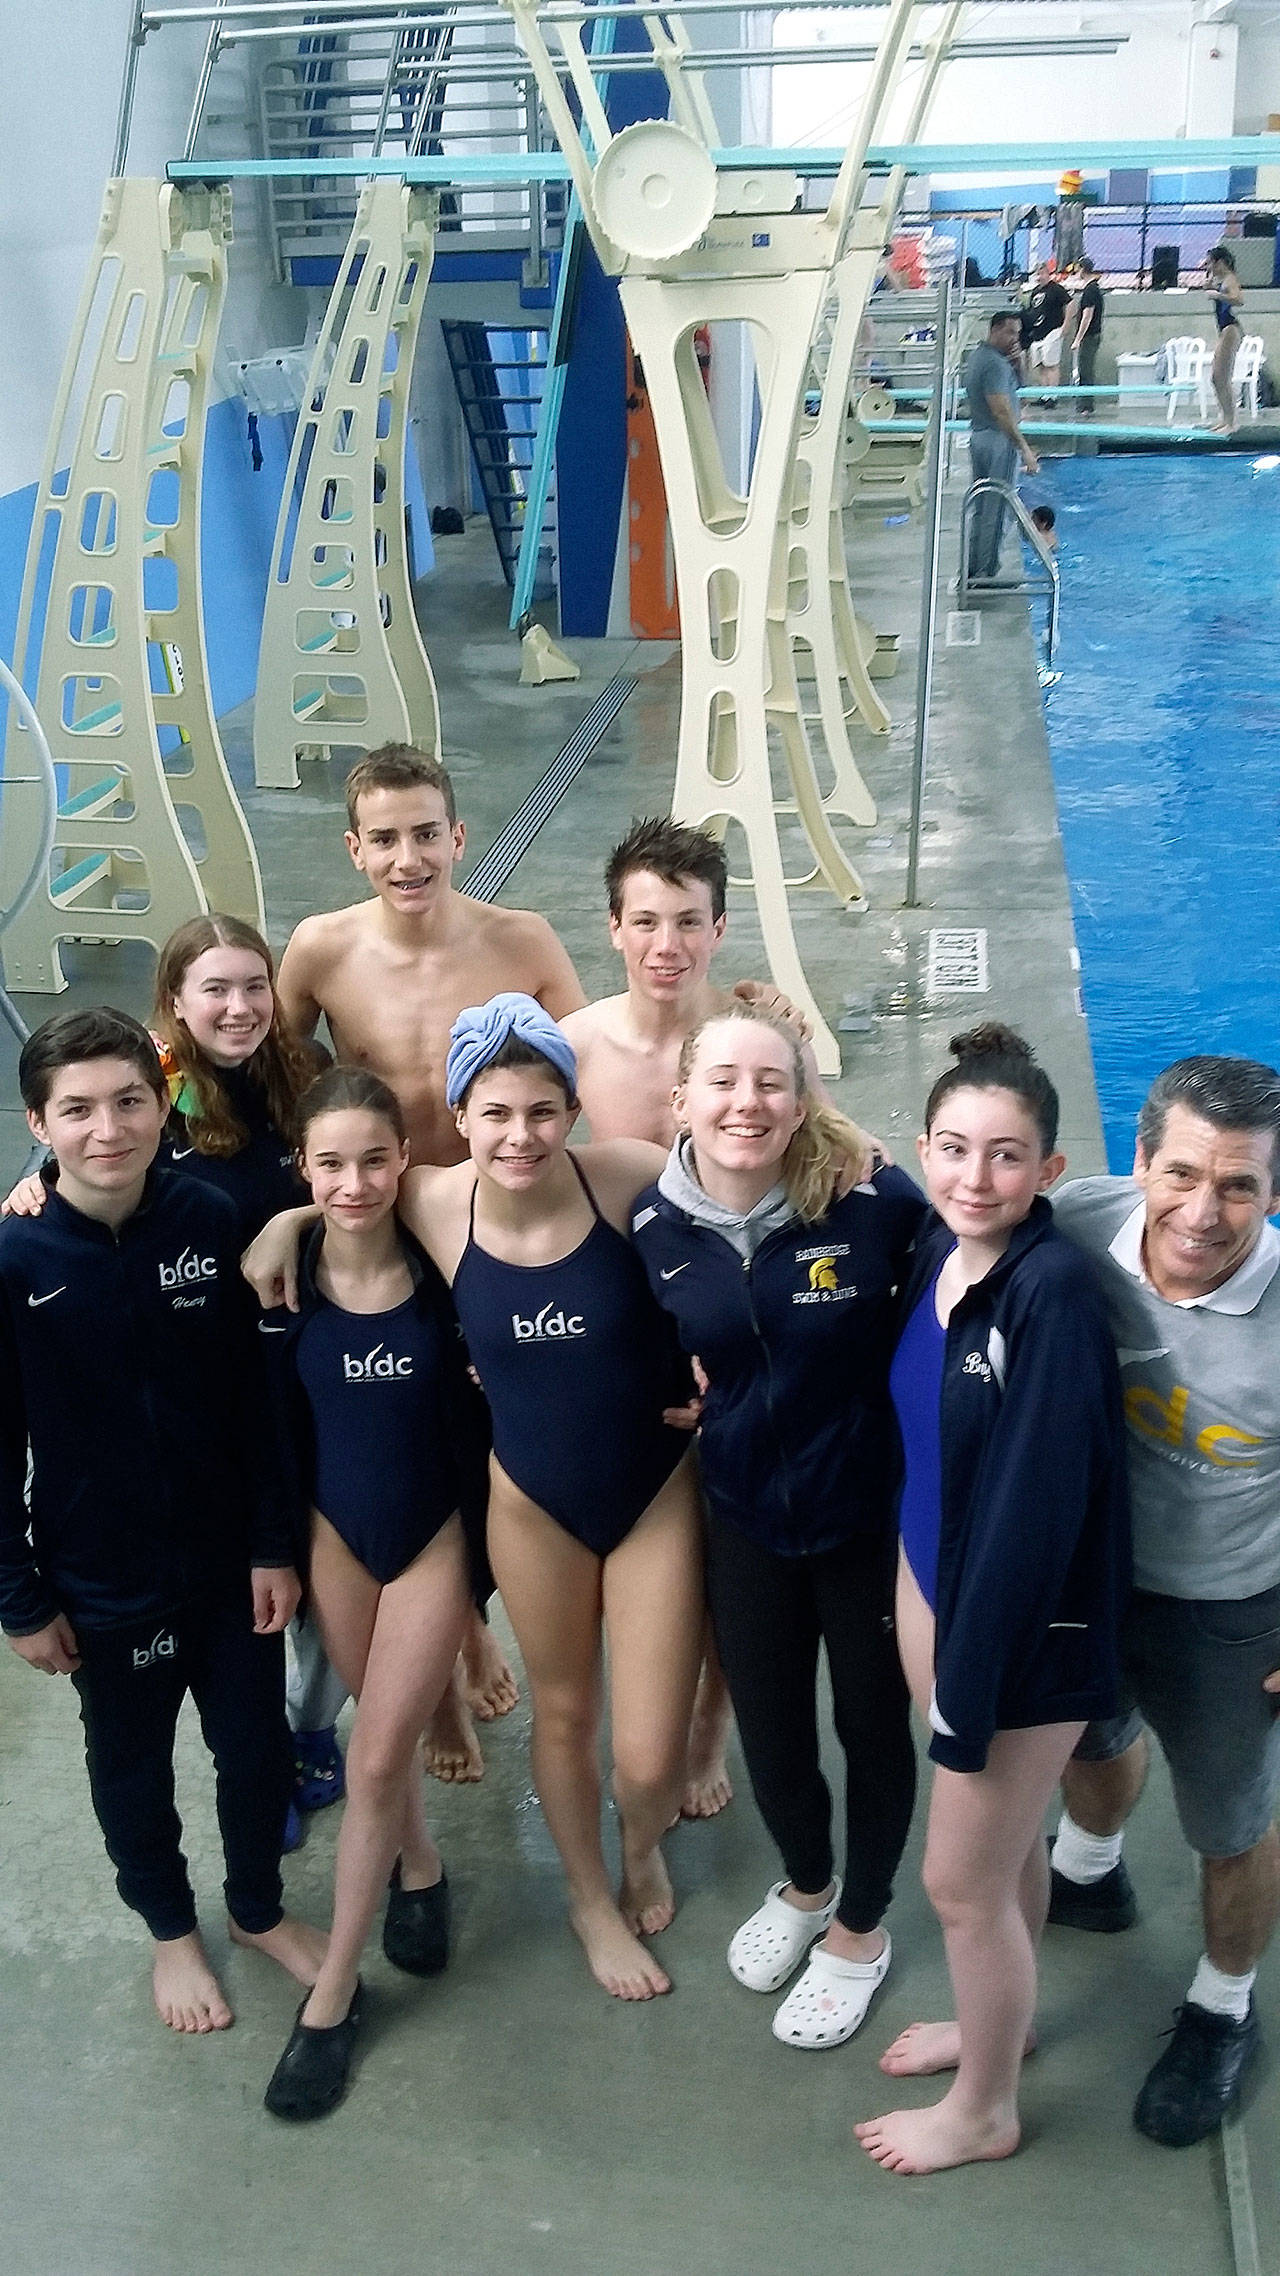 Members of the Bainbridge Island Dive Club gather for a group photo at their last meet of the regular season in Beaverton, Oregon. (Photo courtesy of Adrienne Wolfe)